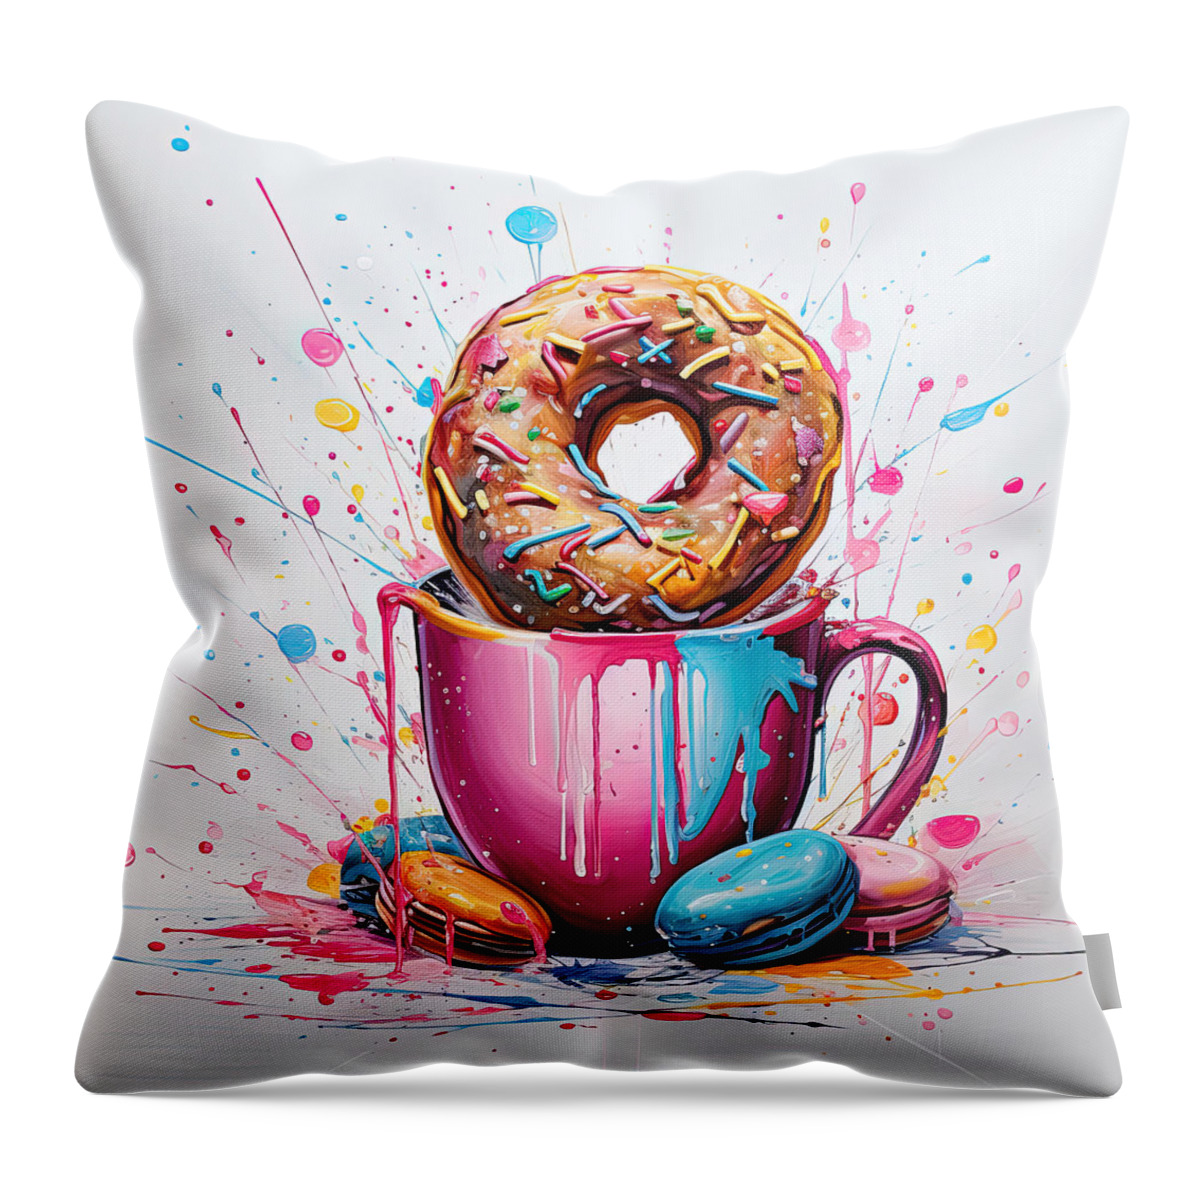 Coffee And Donuts Throw Pillow featuring the digital art Intoxicatingly Addictive by Lourry Legarde